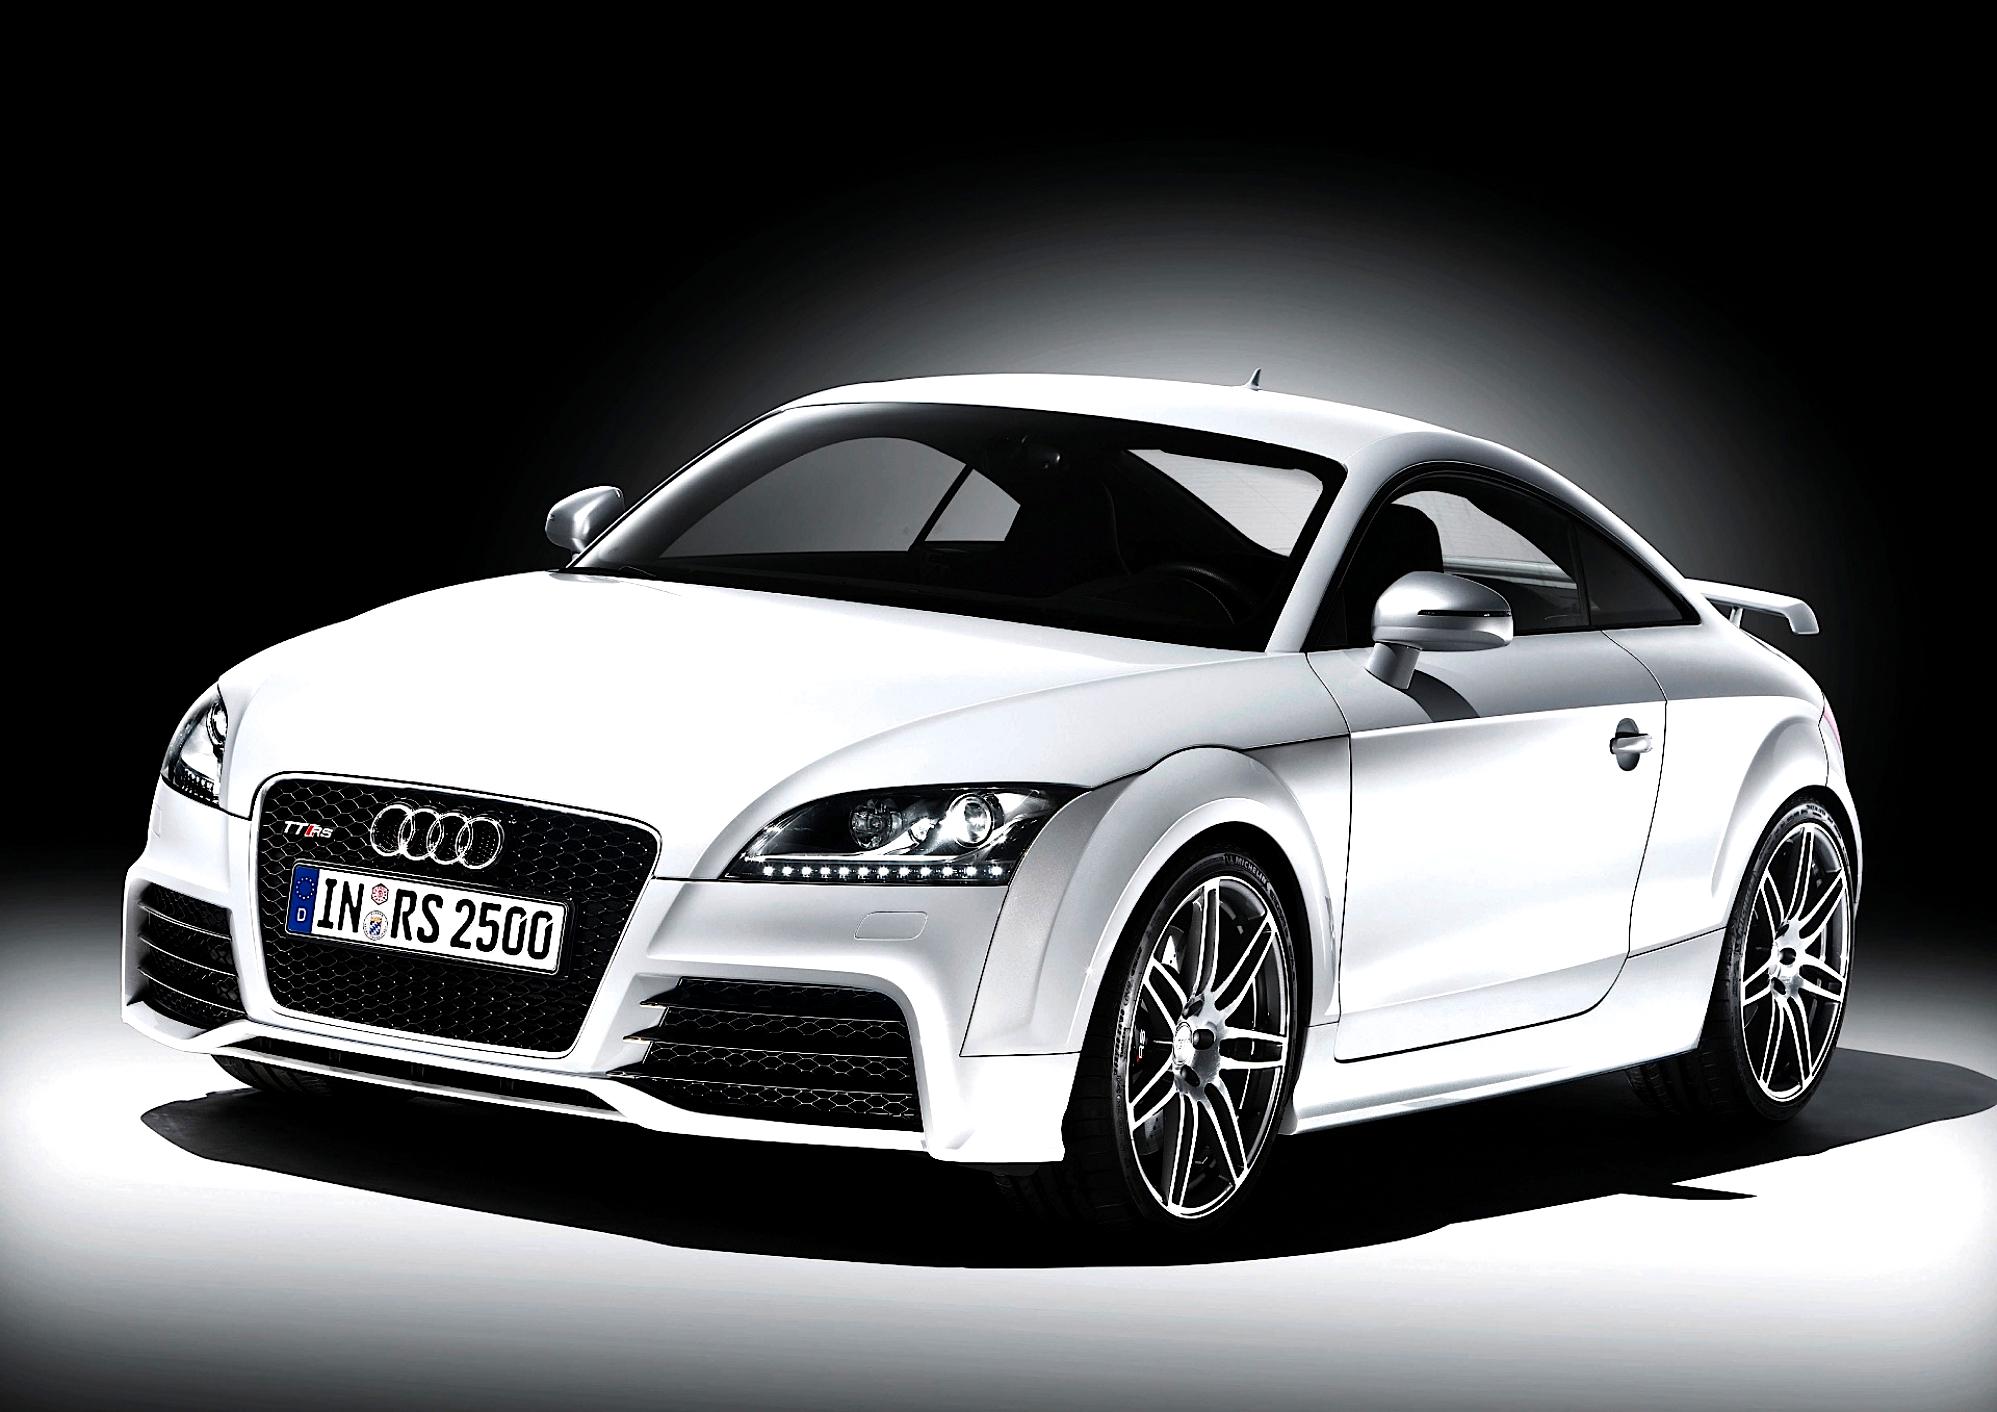 Audi TT RS Coupe 2009 #26